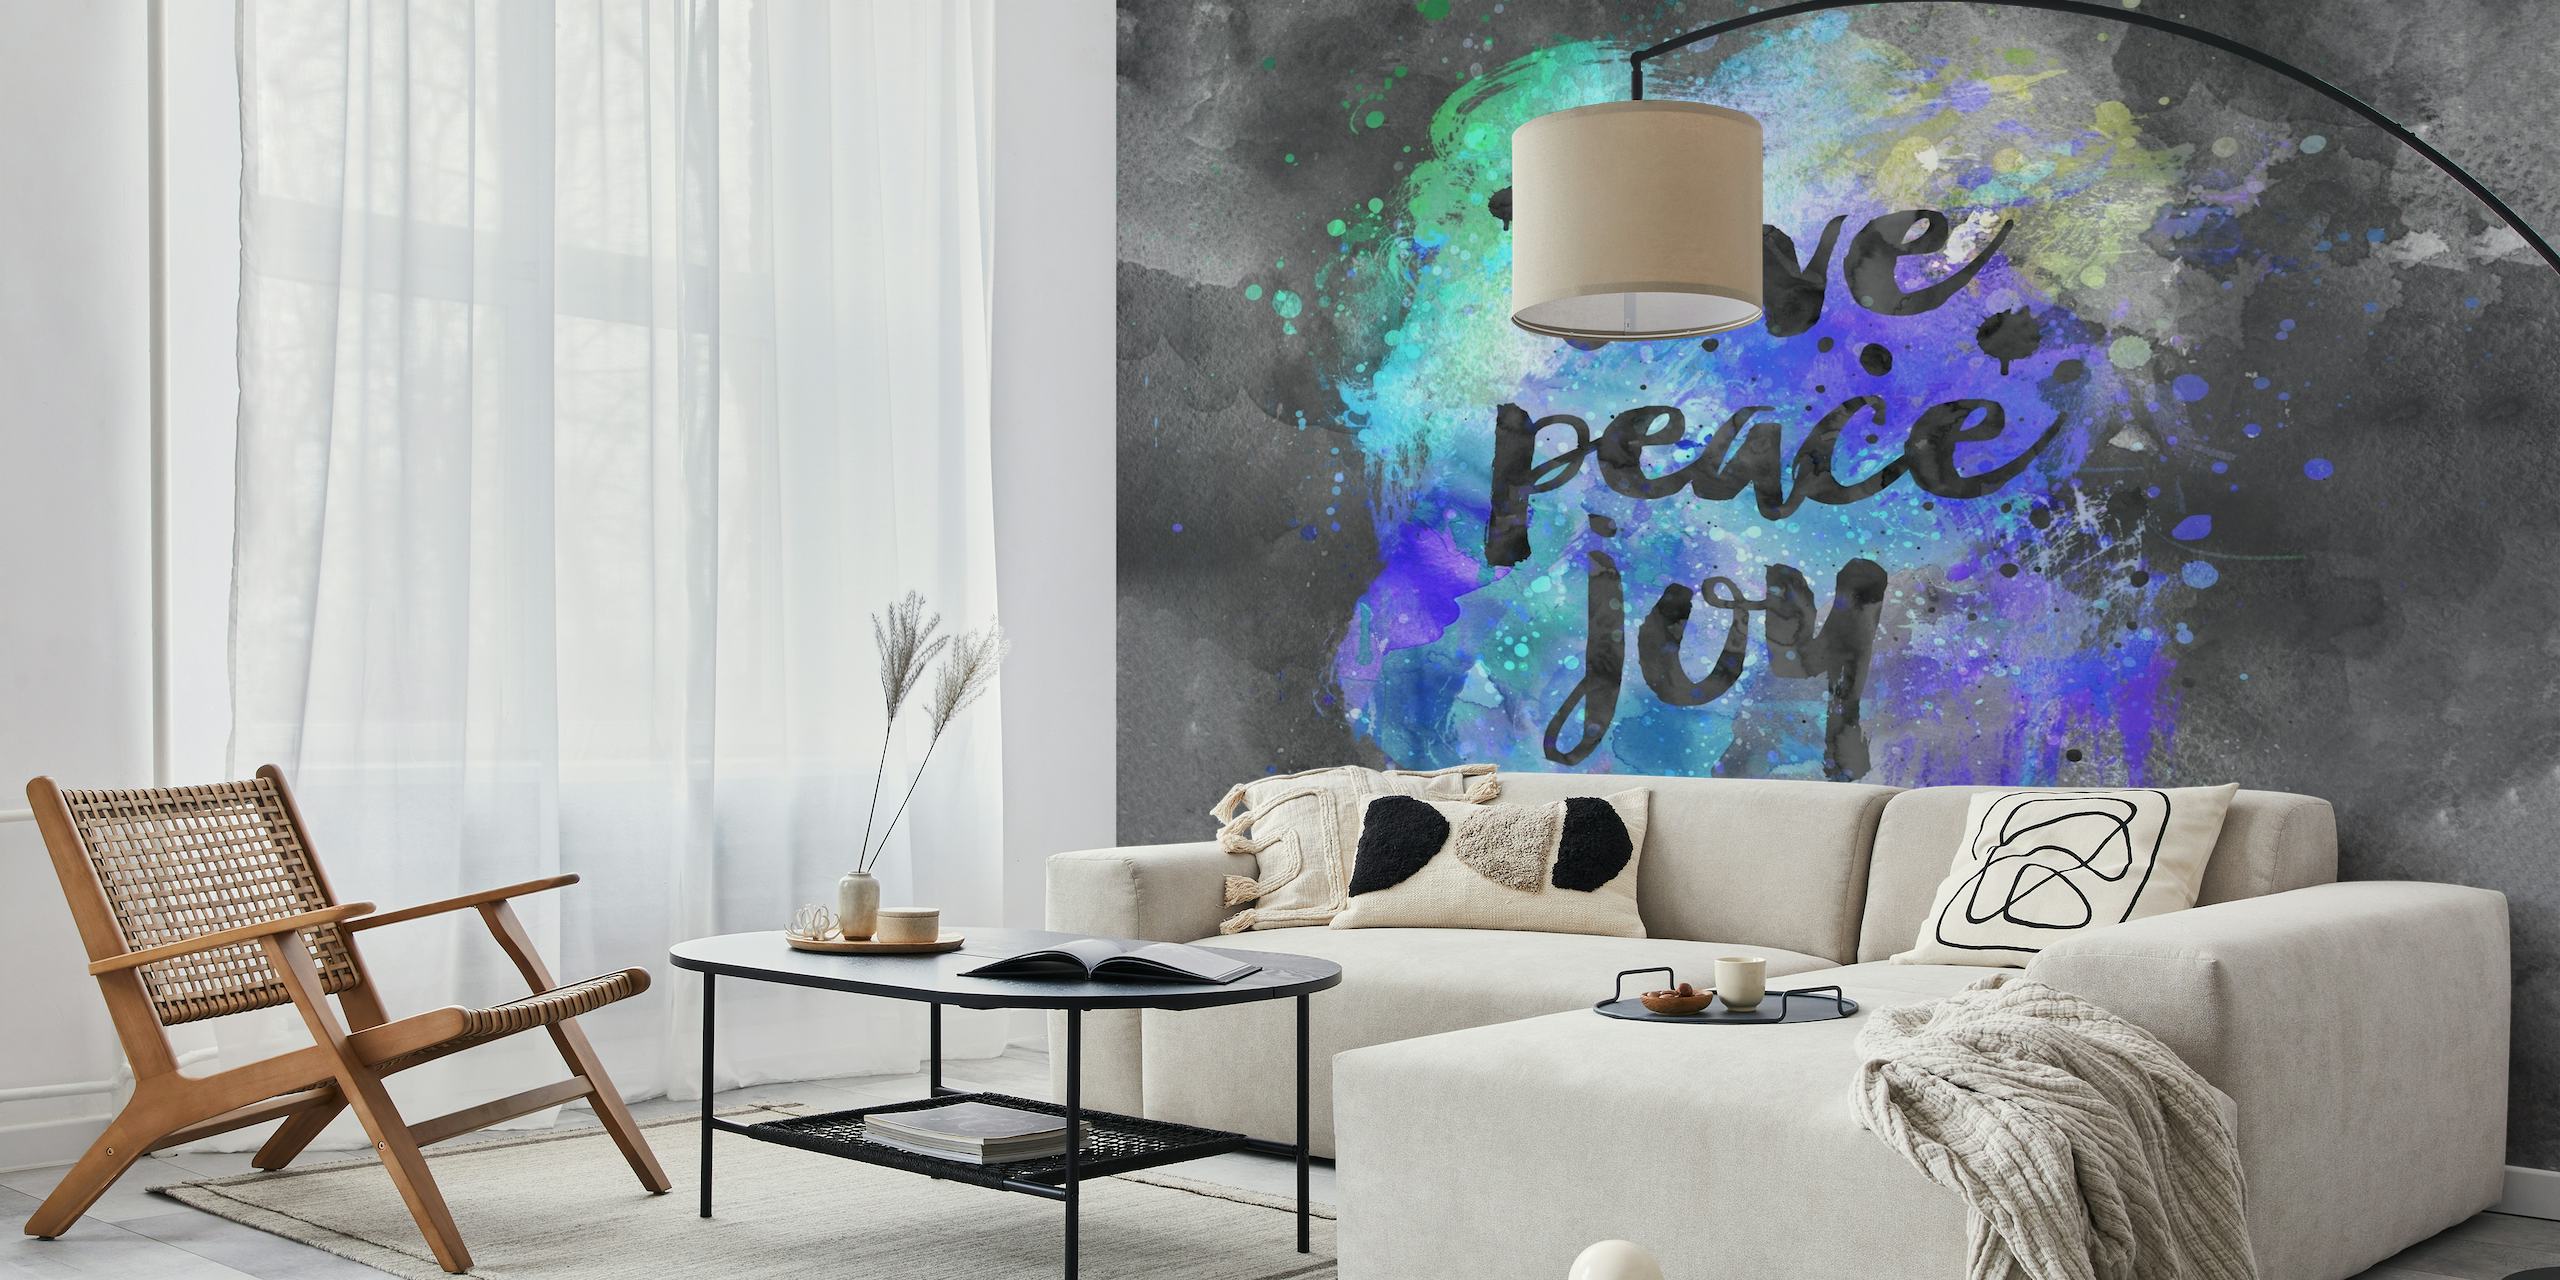 Abstract love peace joy calligraphy wall mural with watercolor background